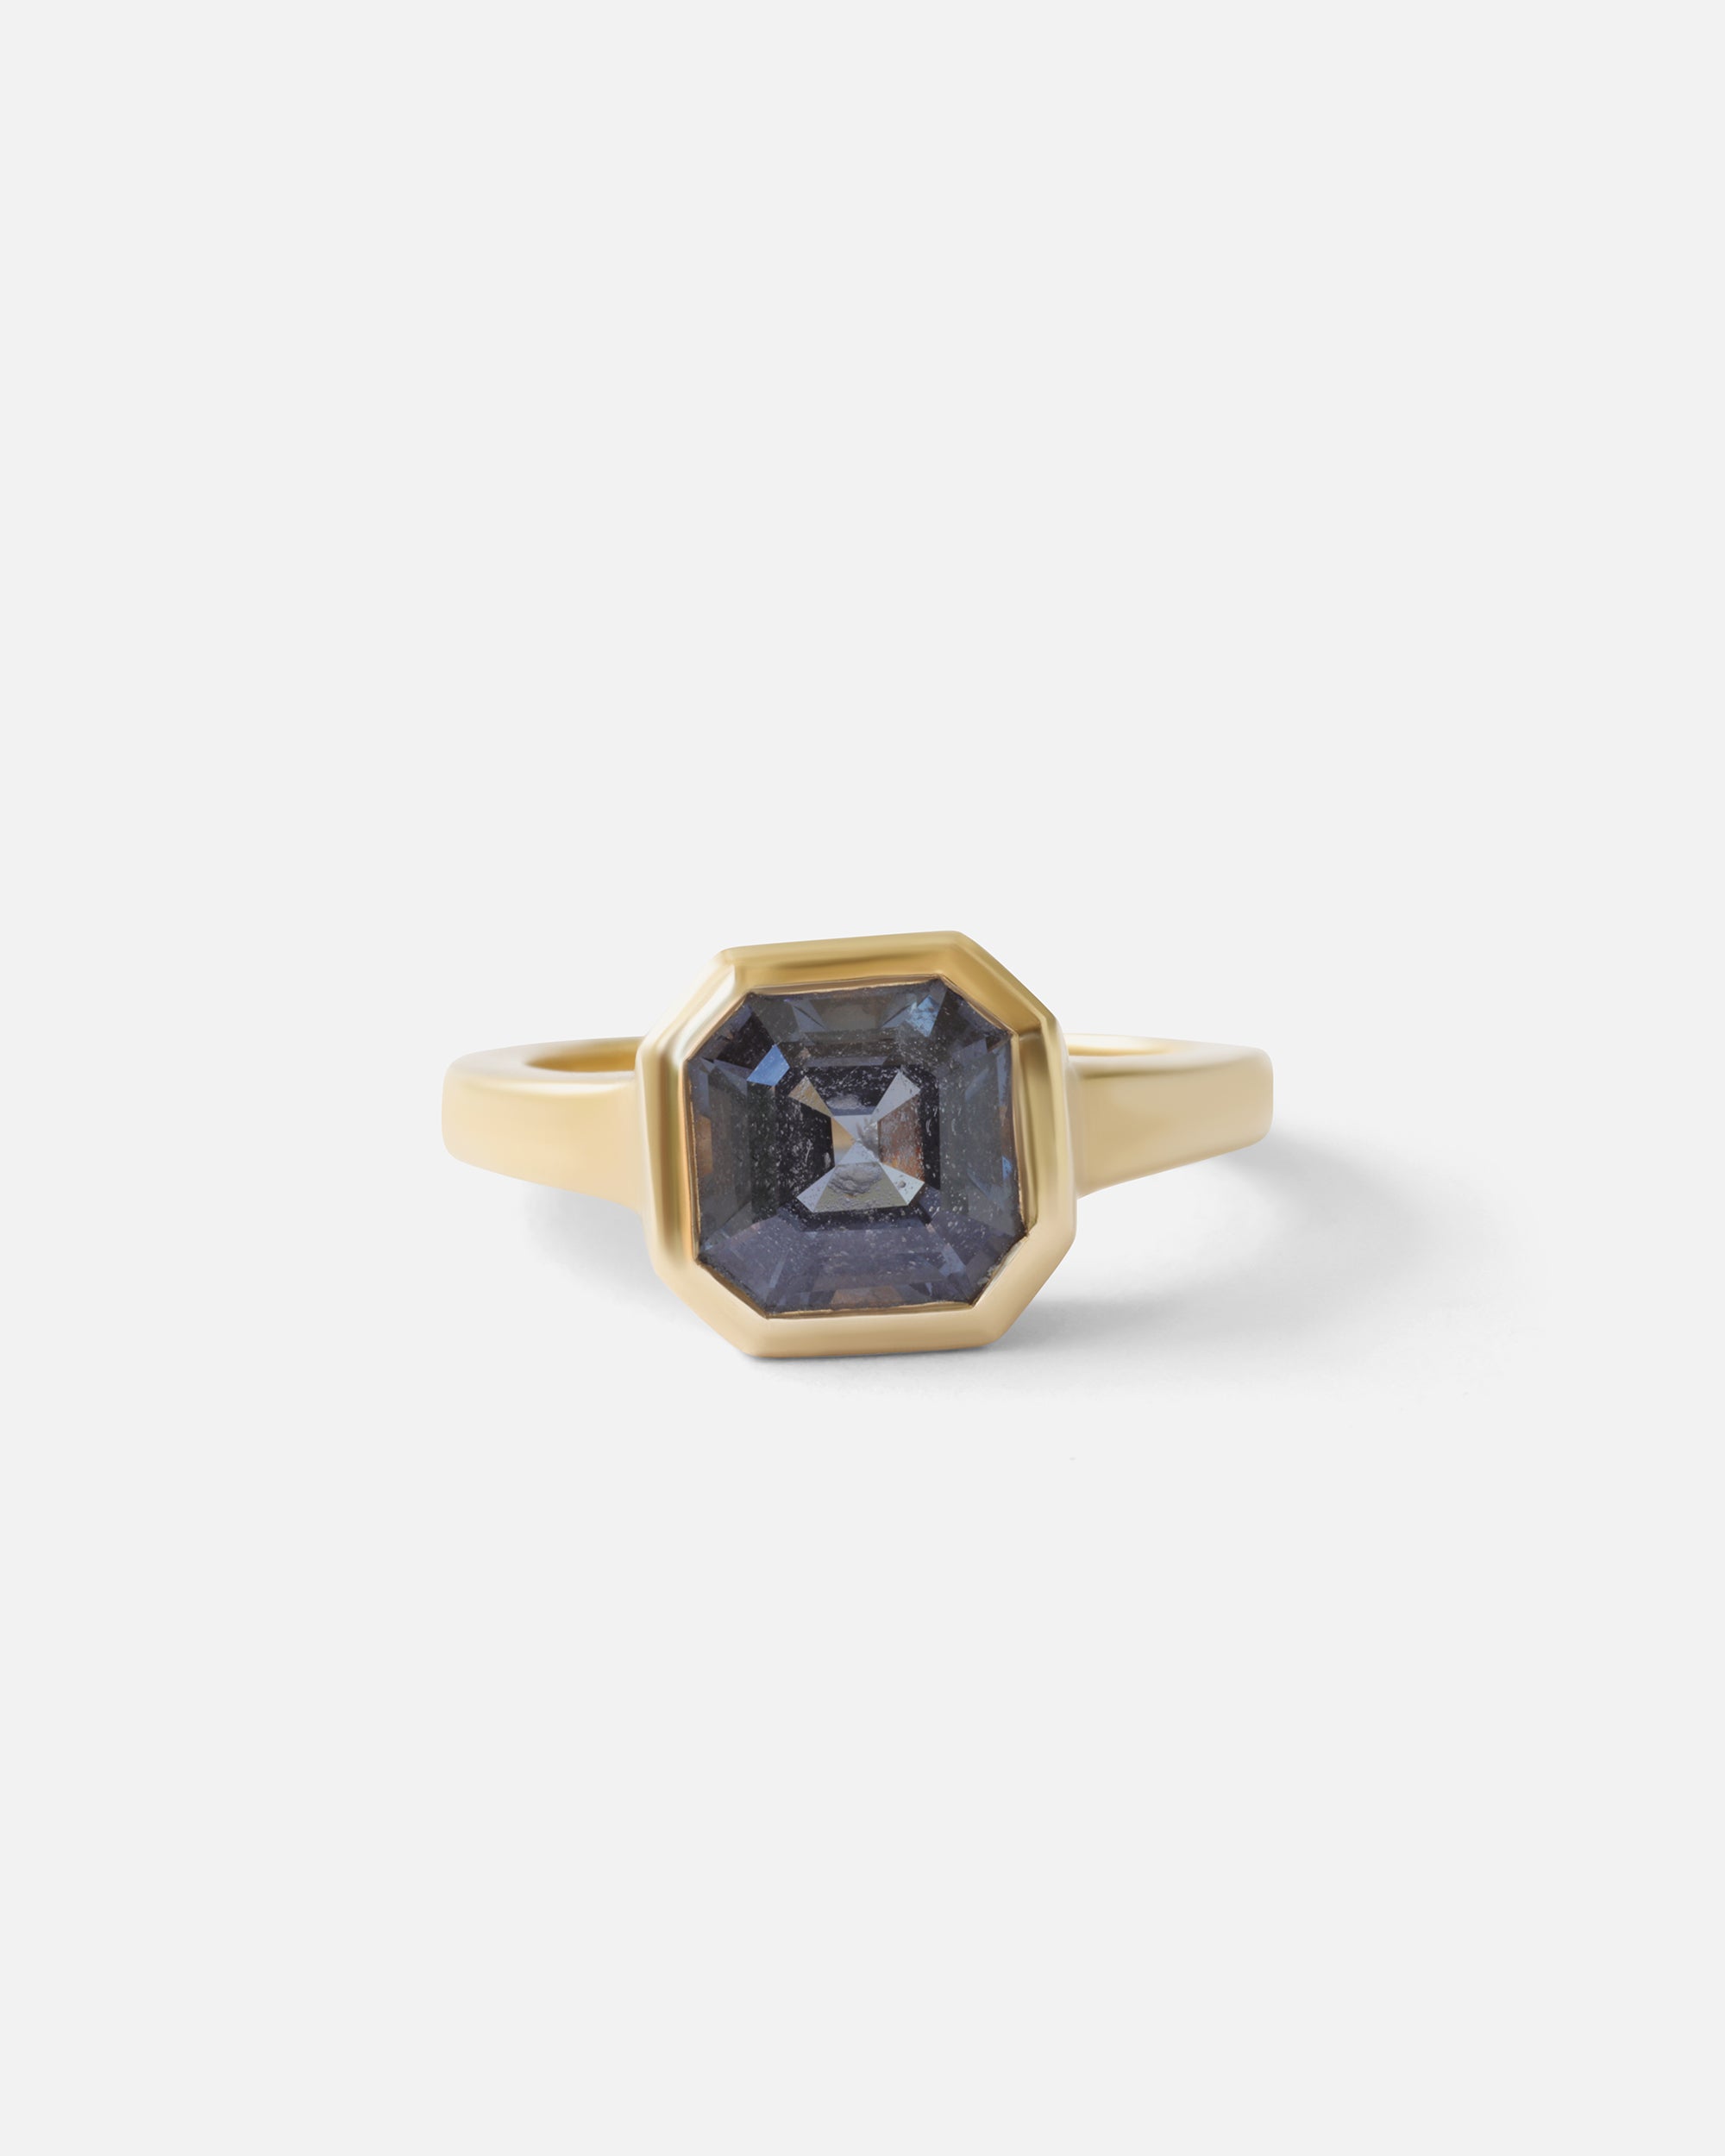 Grey Spinel Ring By Bree Altman